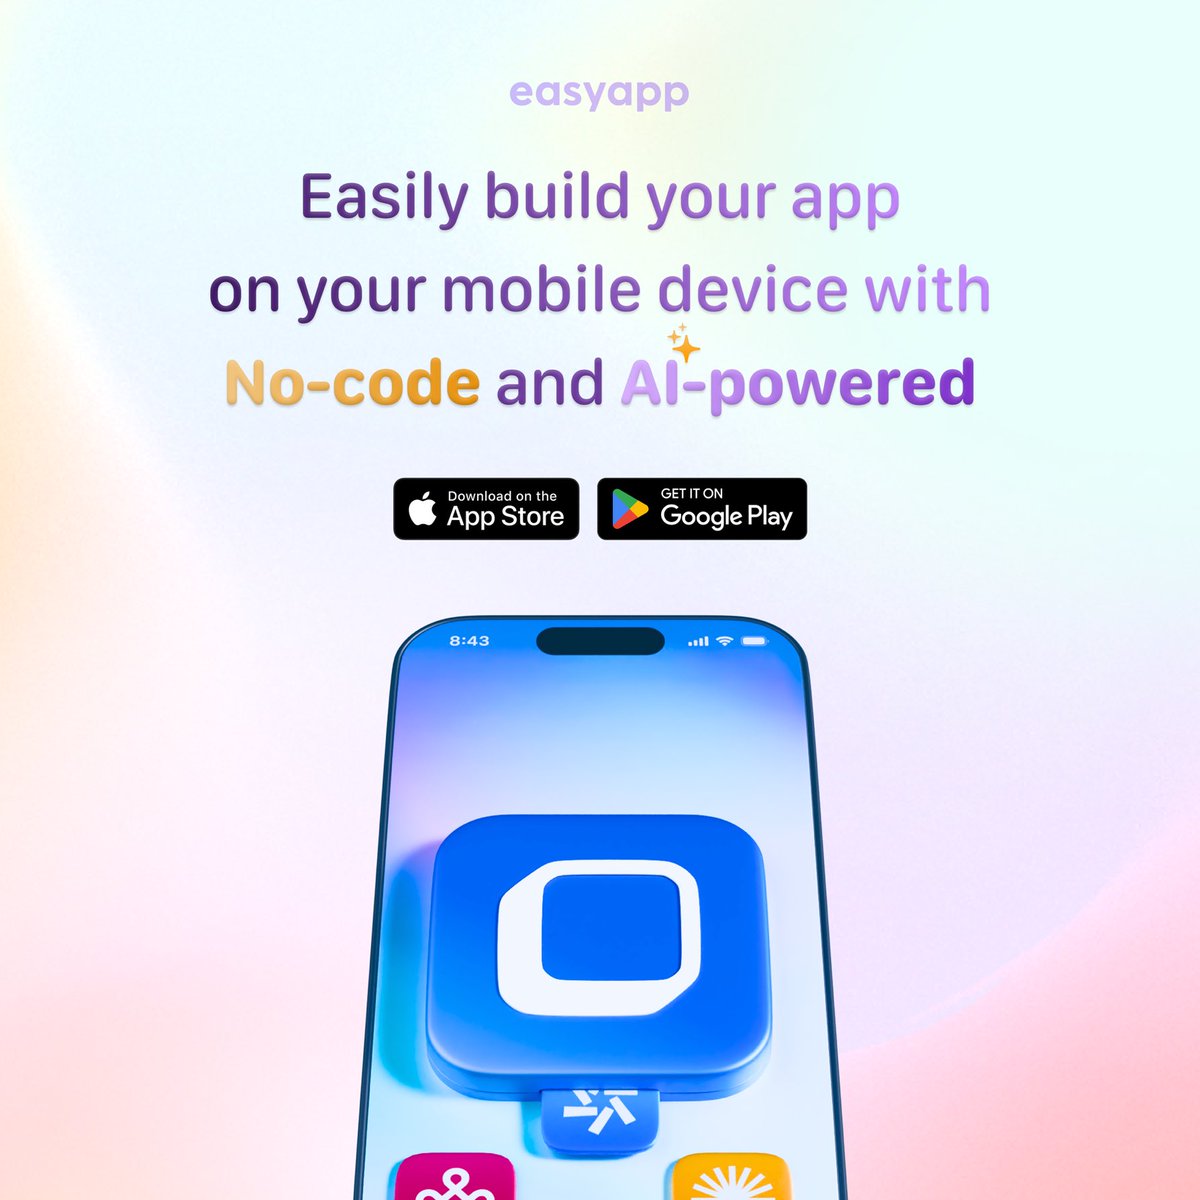 ✨Easily build your app on your mobile device with No-code and Al-powered. #easytoapply